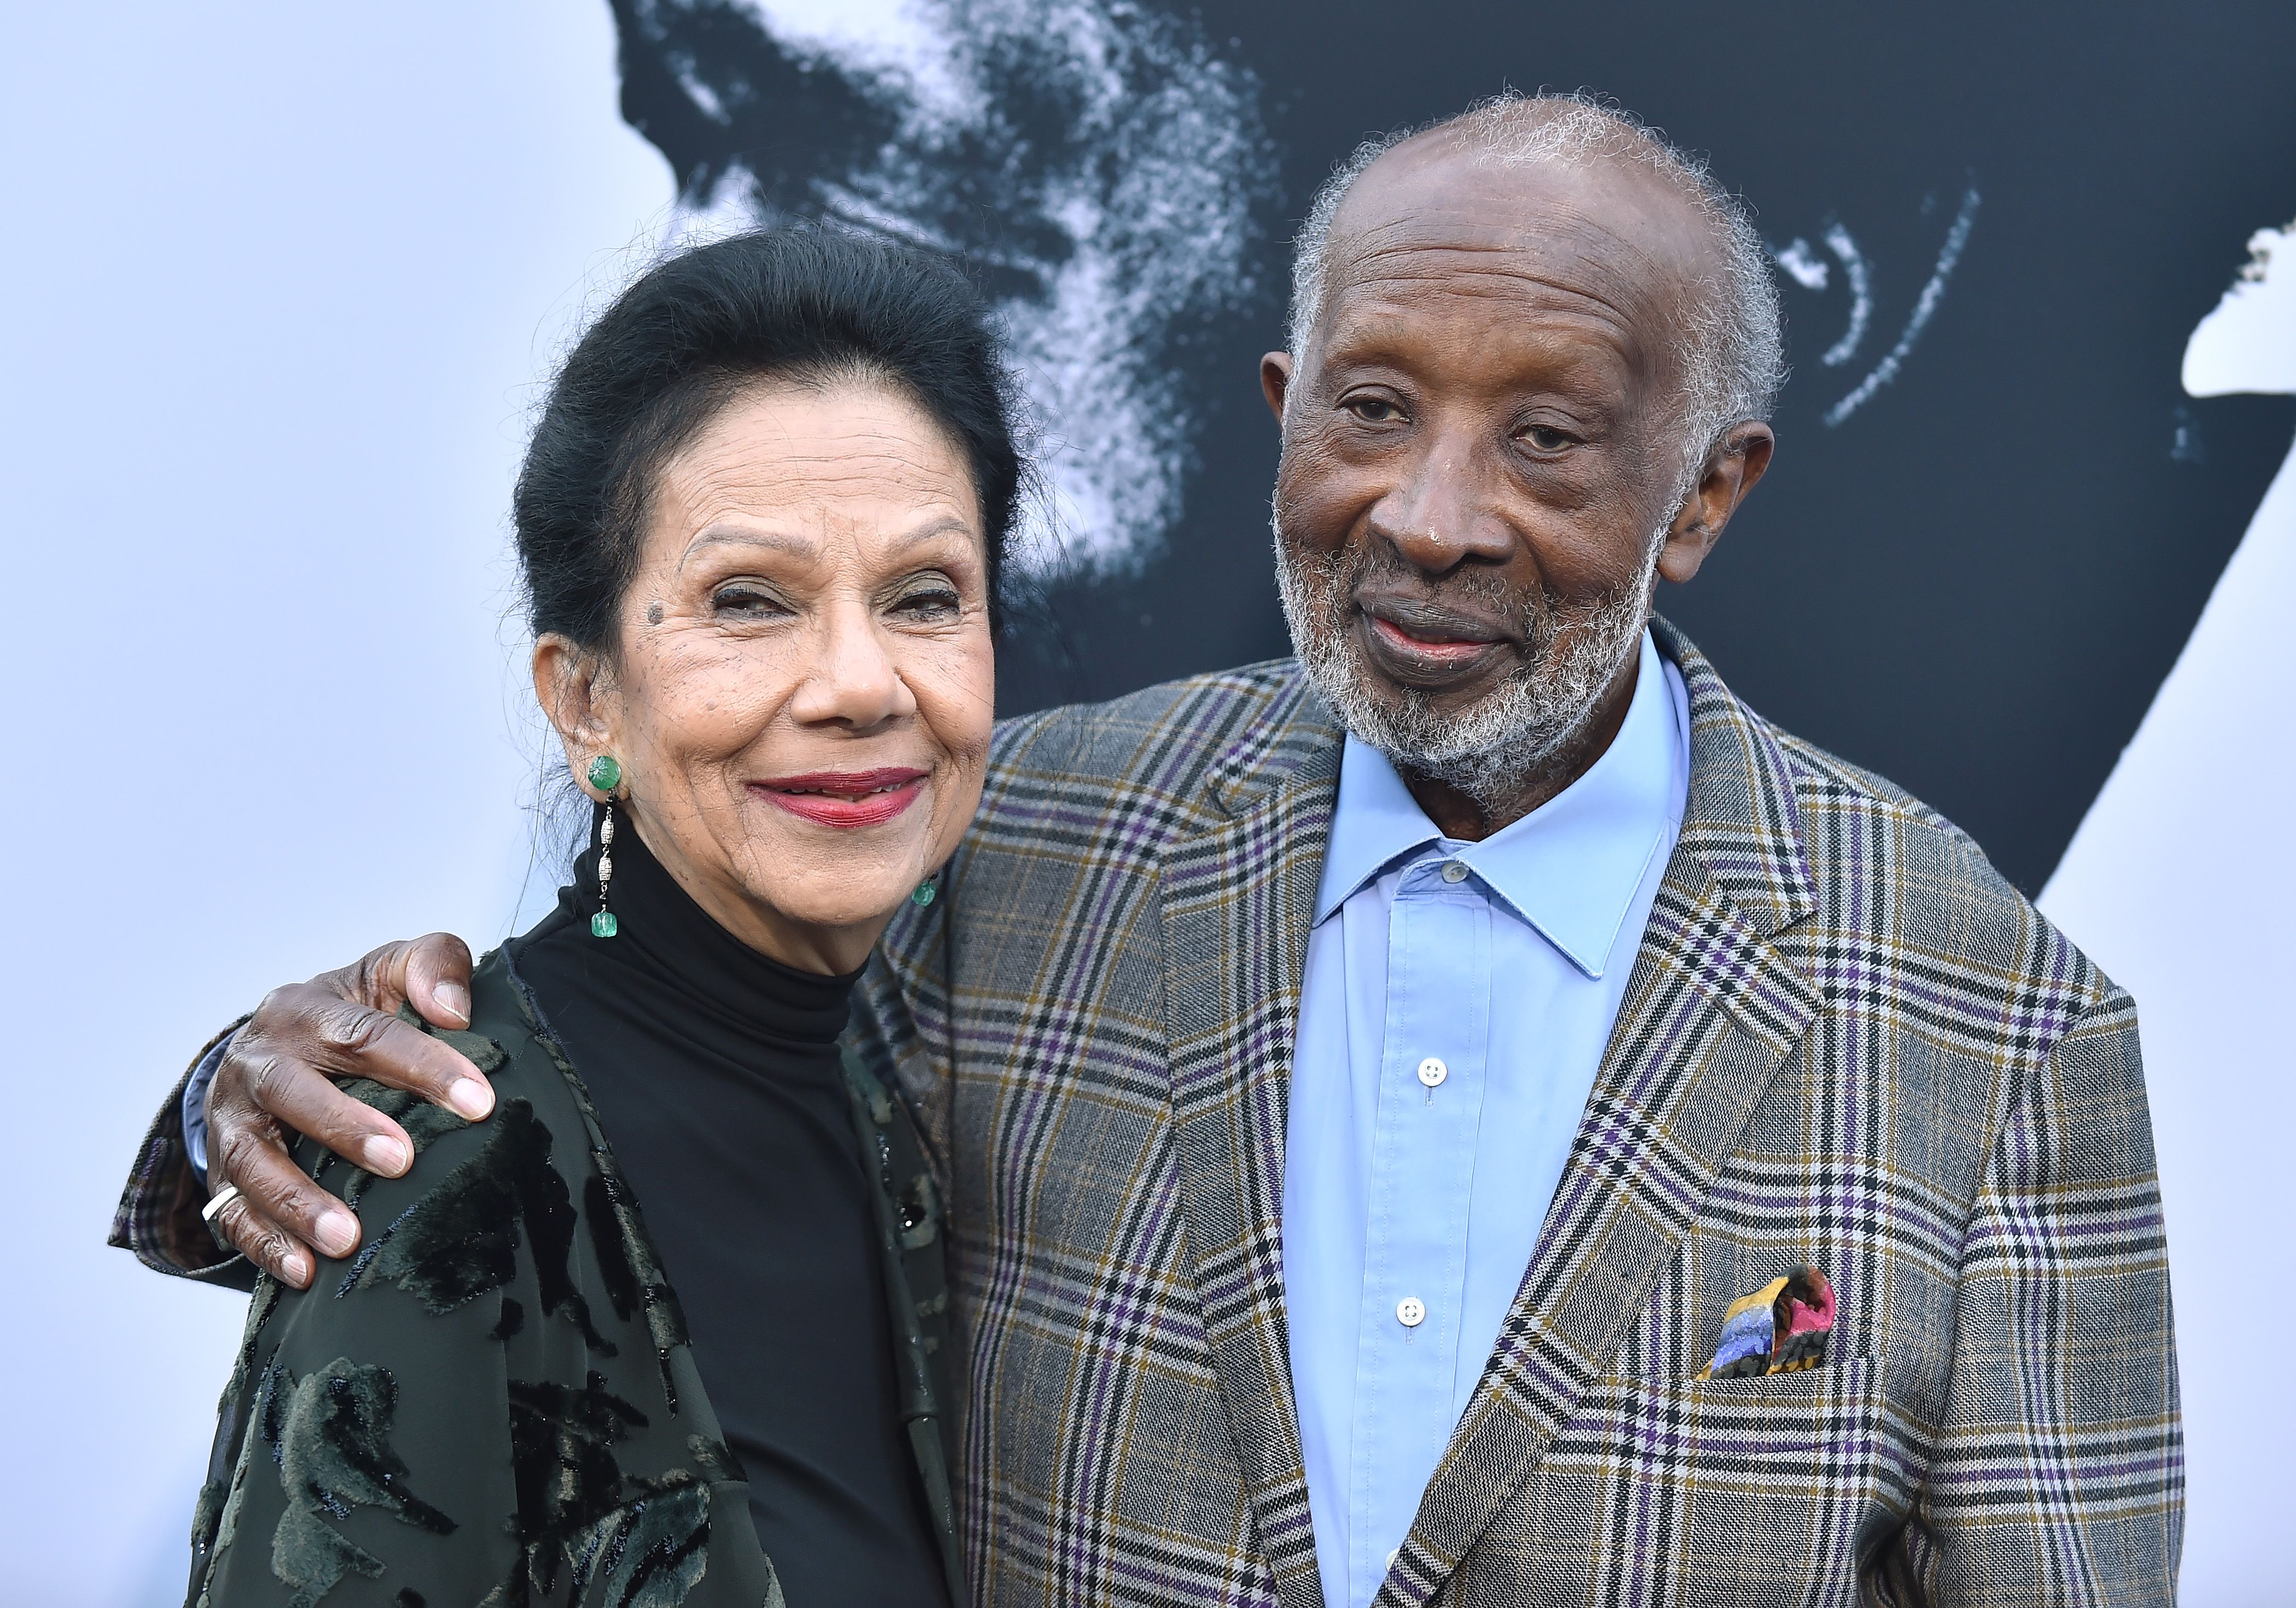 Jacqueline and Clarence Avant attend the premiere of a Netflix documentary about Mr Avant’s life on 3 June, 2019